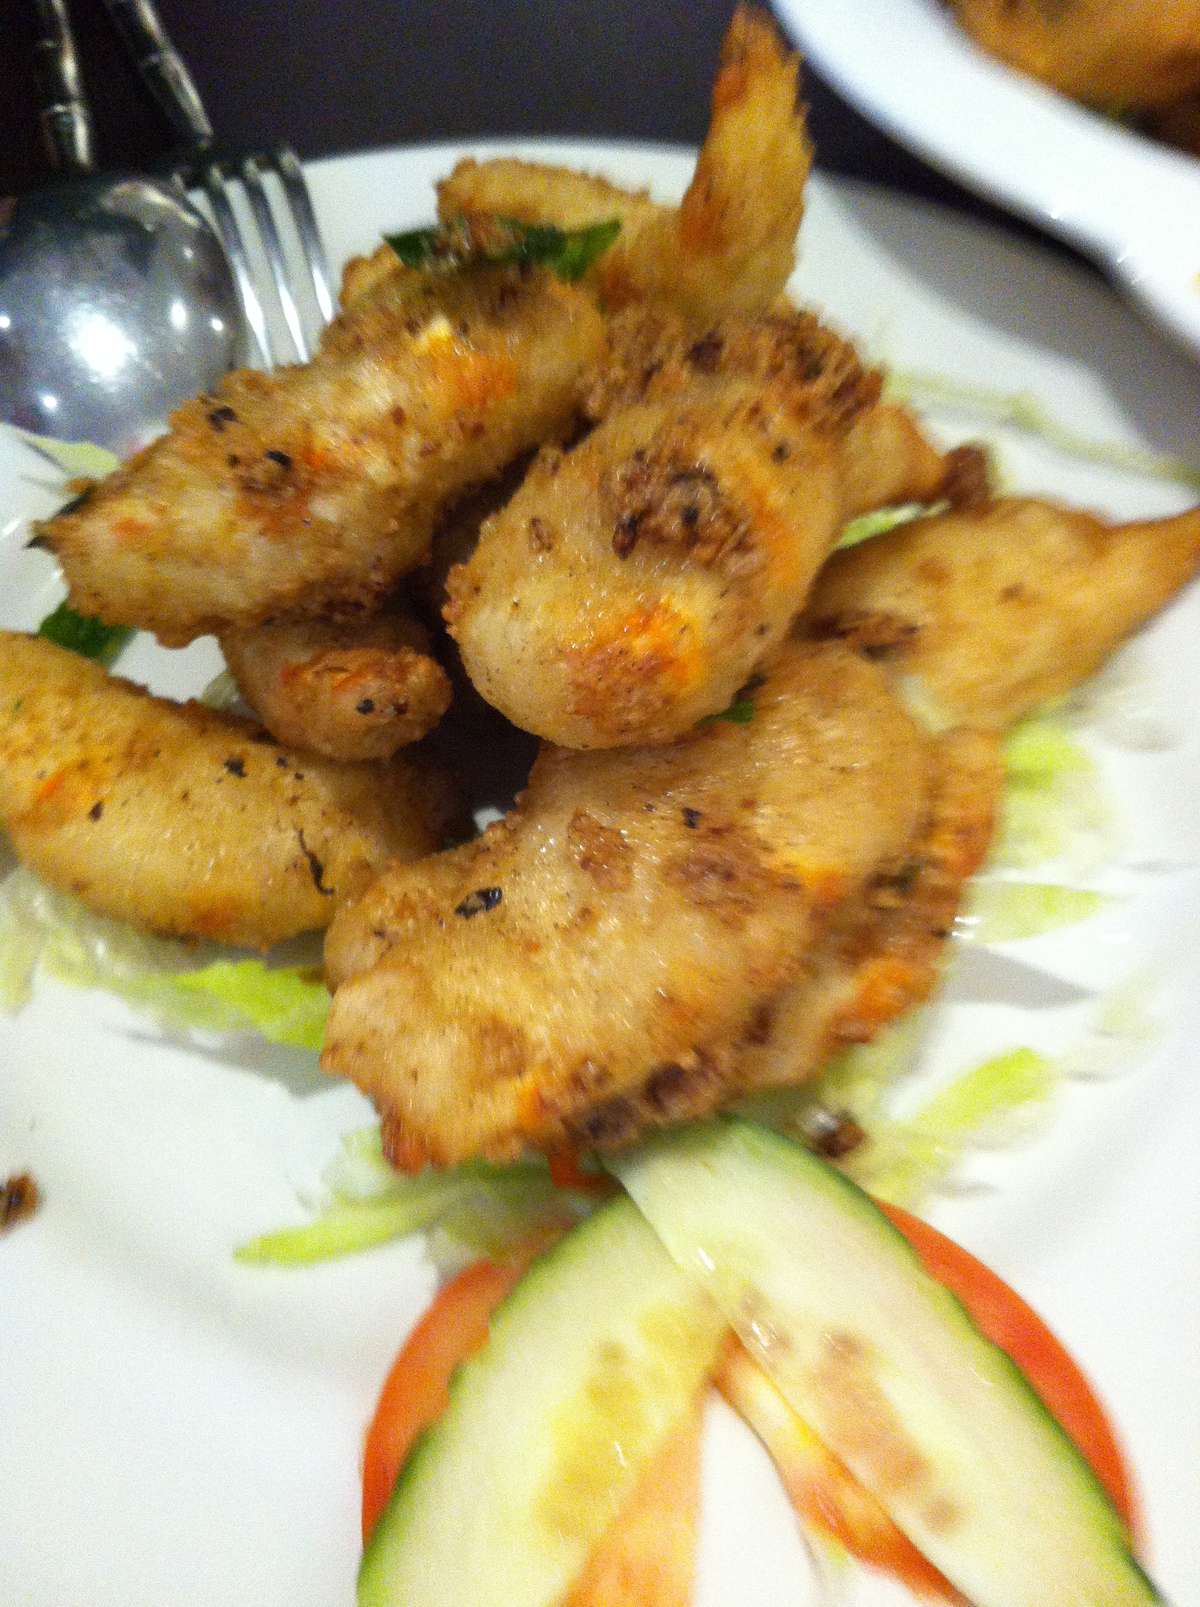 Malaysian "Prawns" in a salt & pepper sorta-spiced batter  - DELICIOUS!!! Can\'t wait to have them again! (from Banquet A) - Vegie Mum's photo